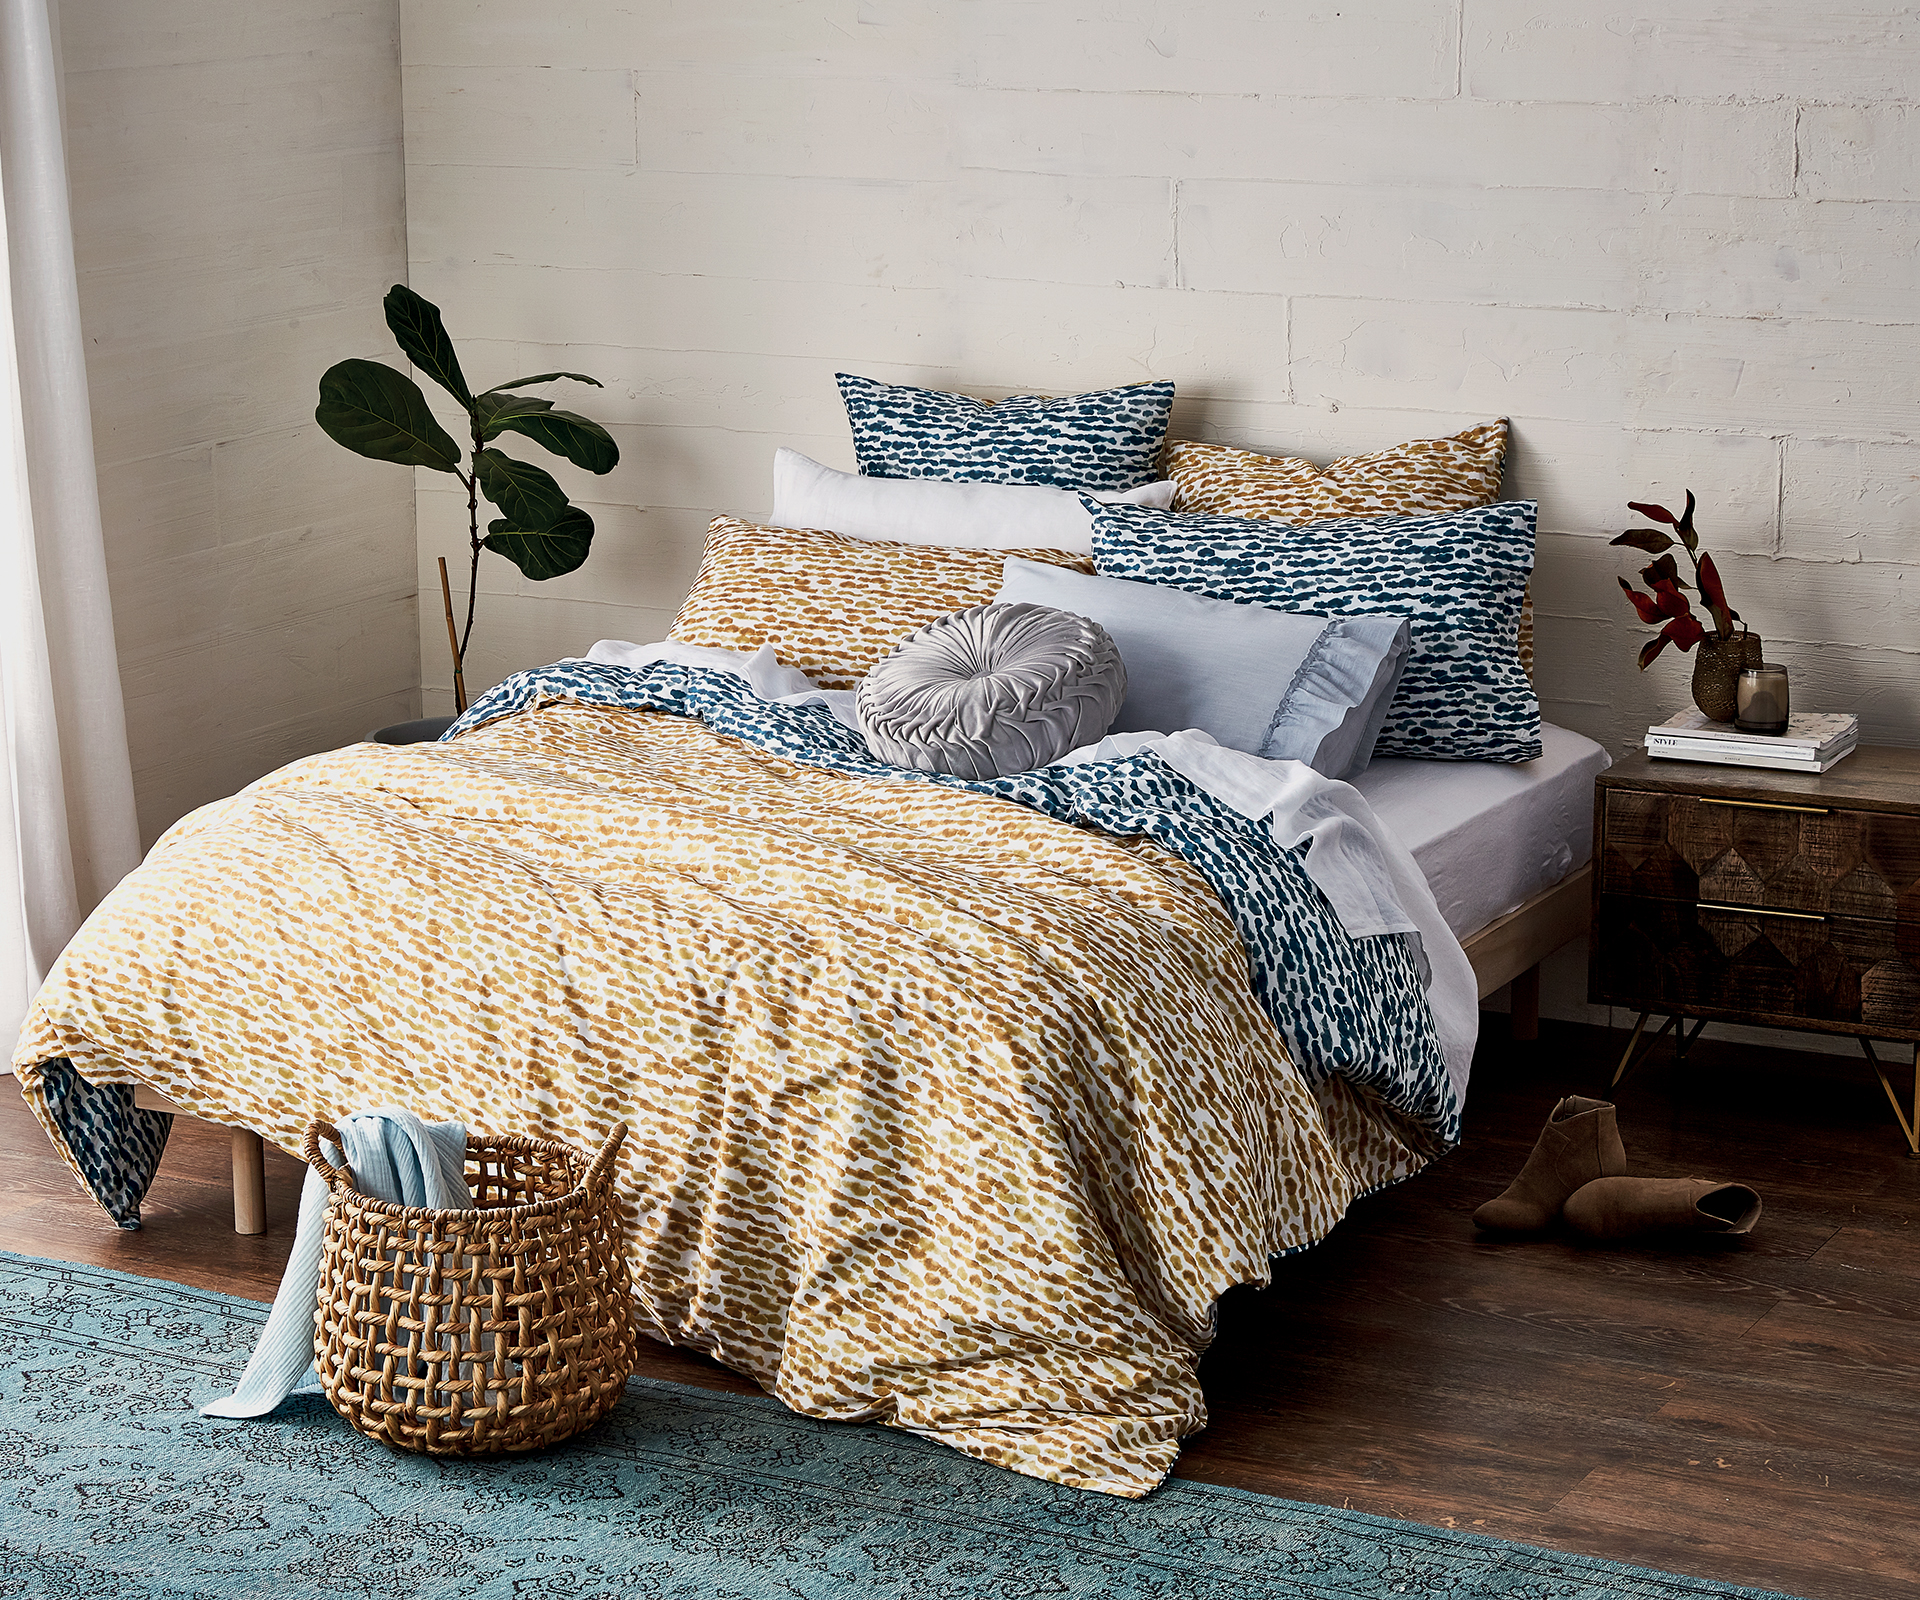 3 Ways To Make Your Bed The Most Stylish Space In Your Home